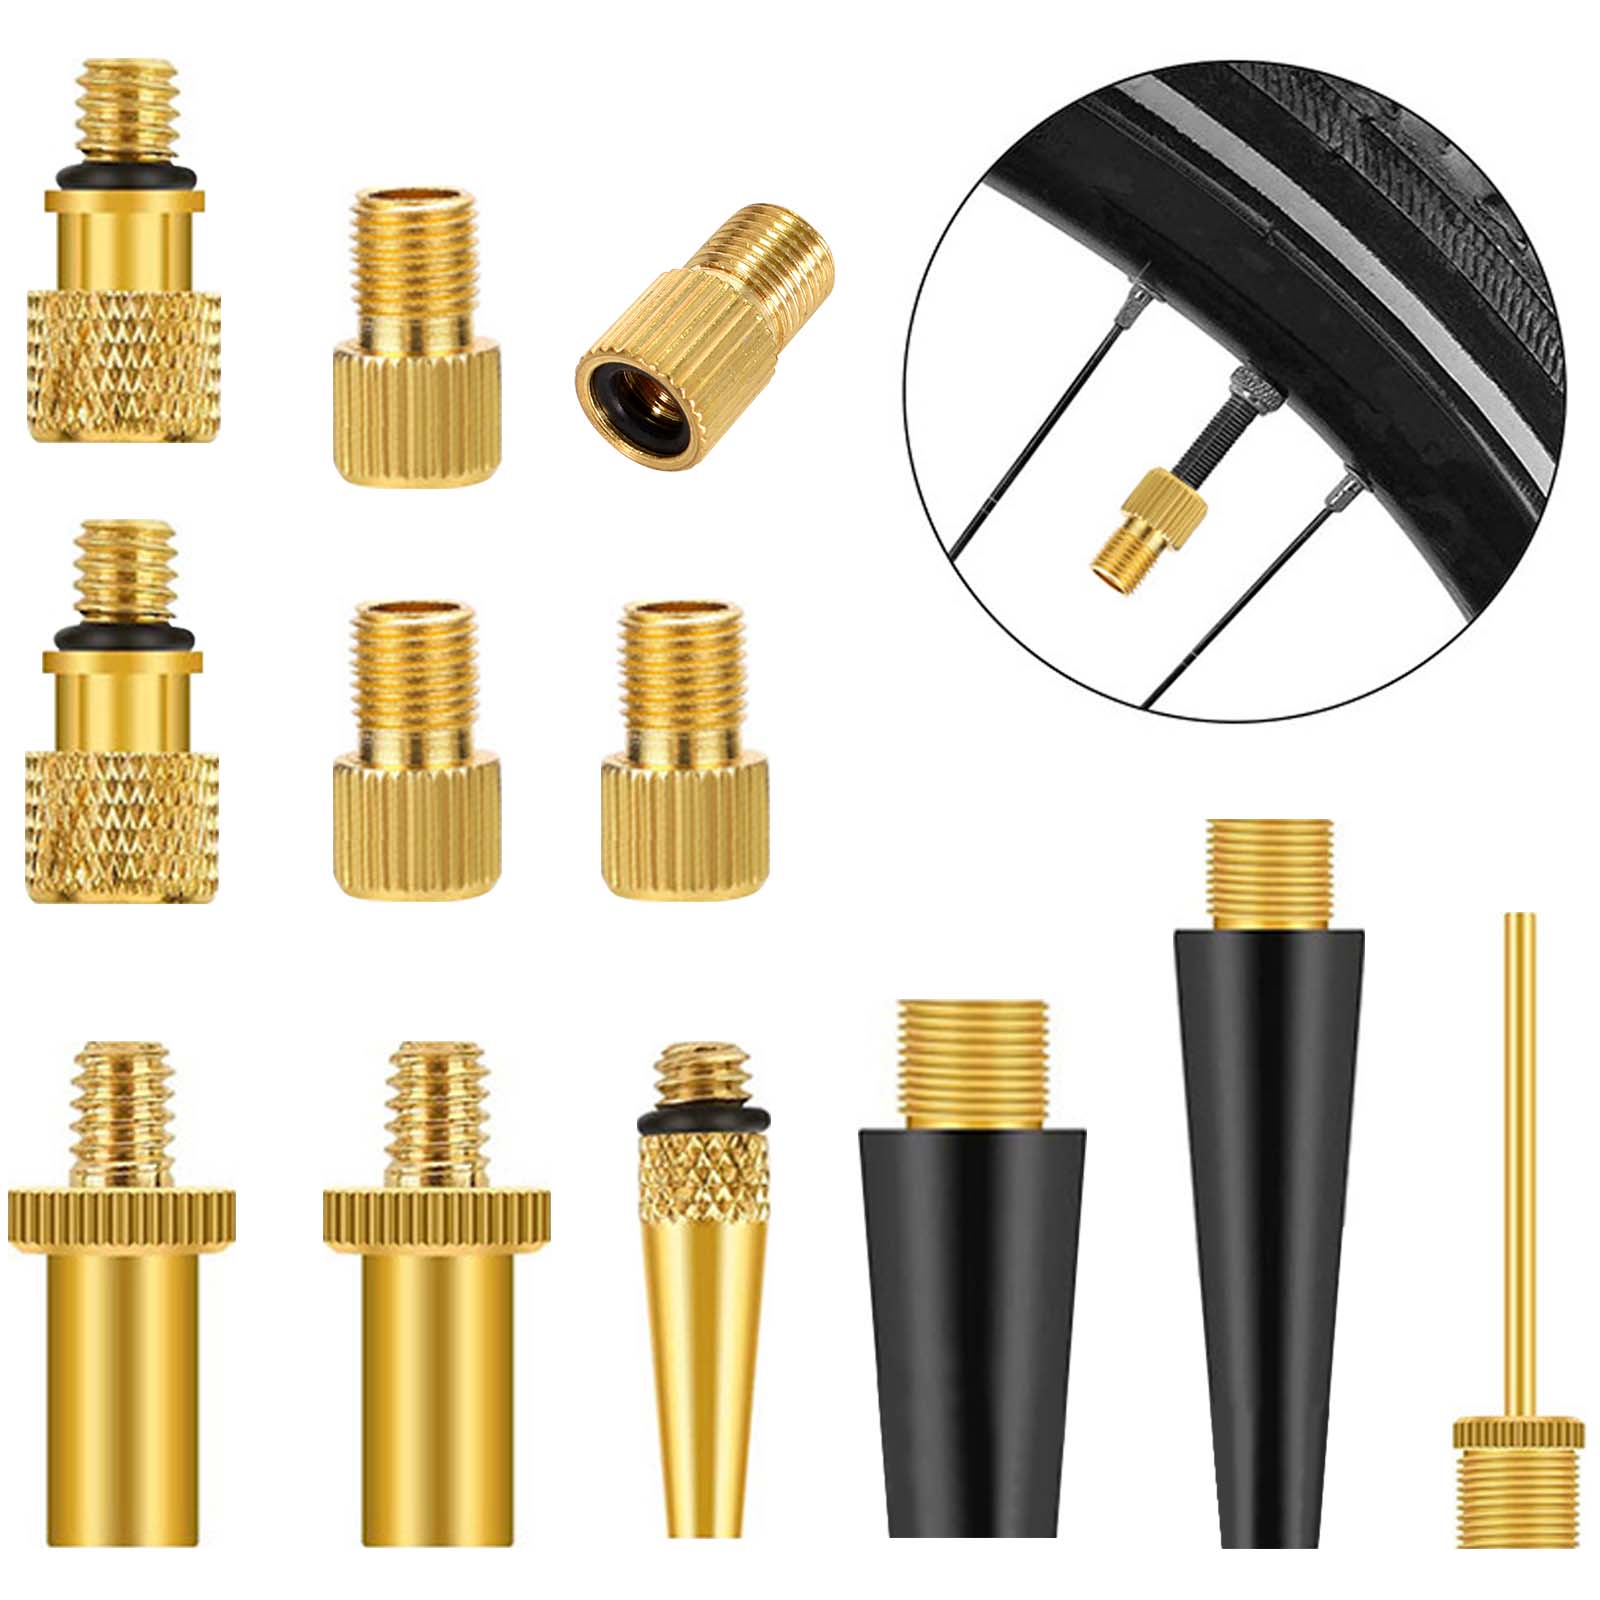 10PCS/Set Bike Tire Valves Adapter French to US Air Compressor